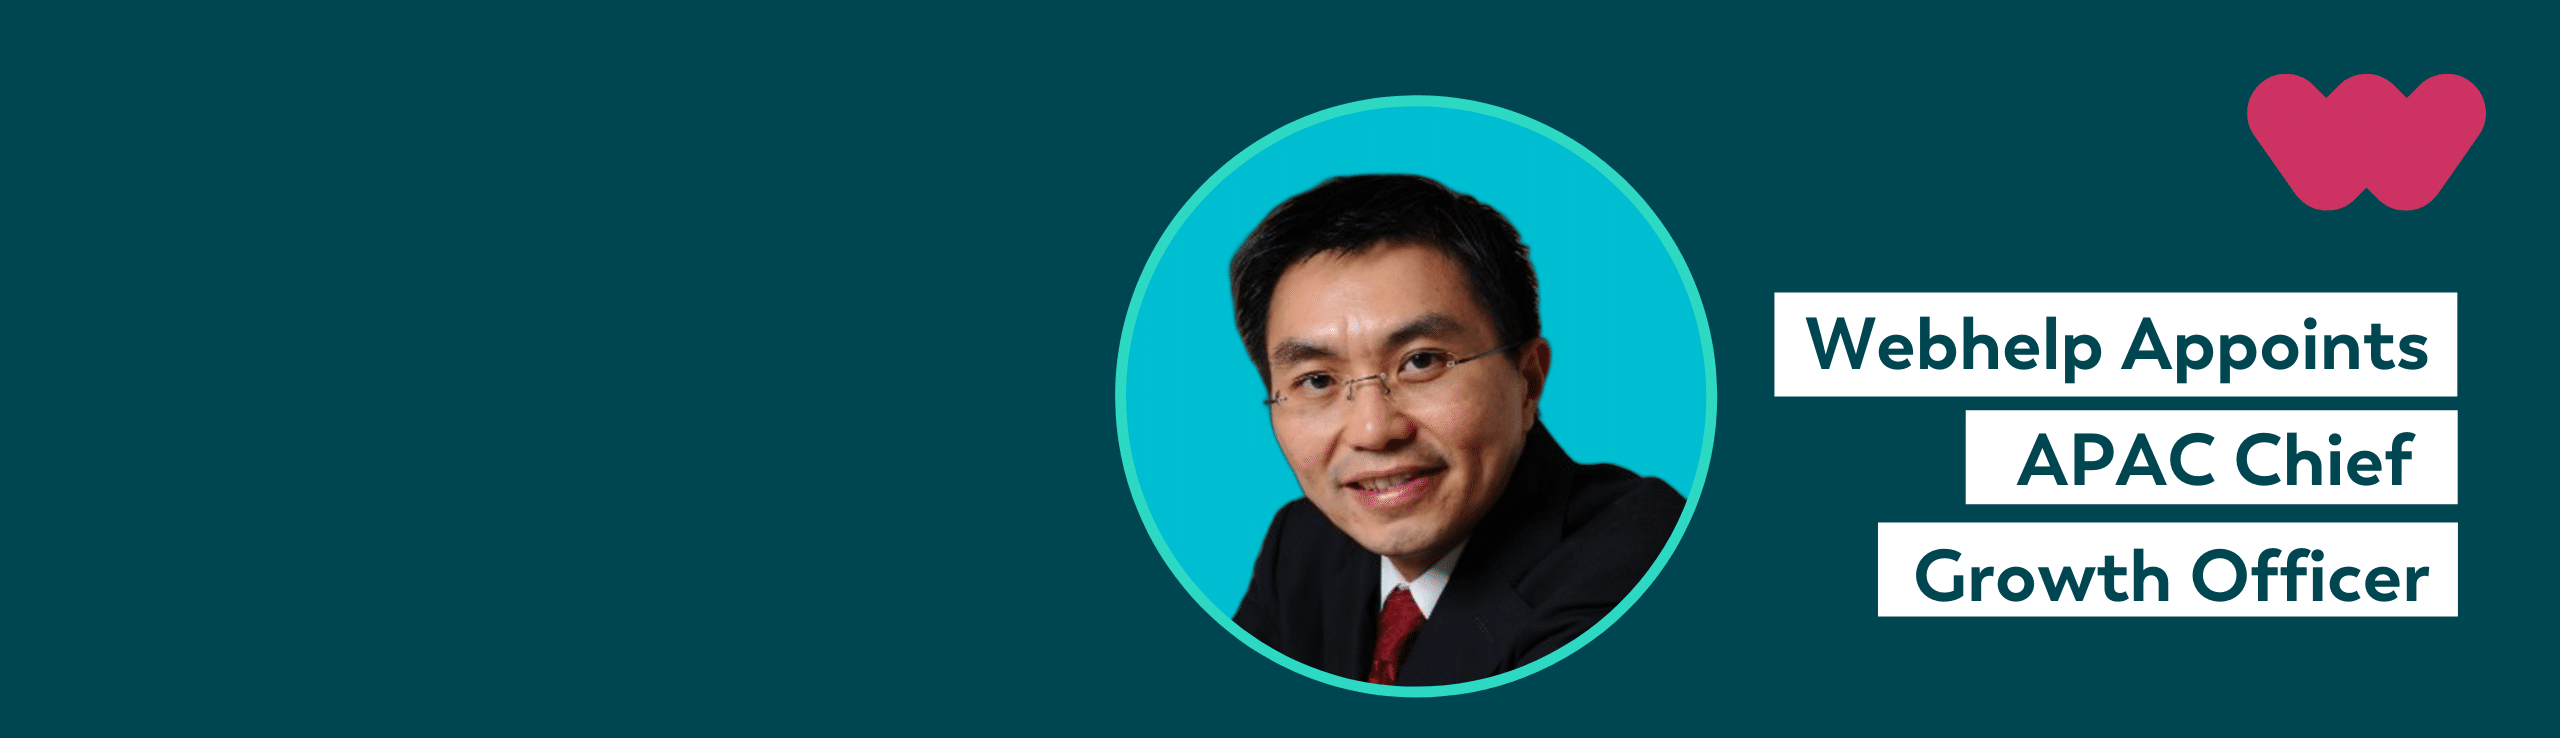 Webhelp Welcomes Chief Growth Officer in APAC